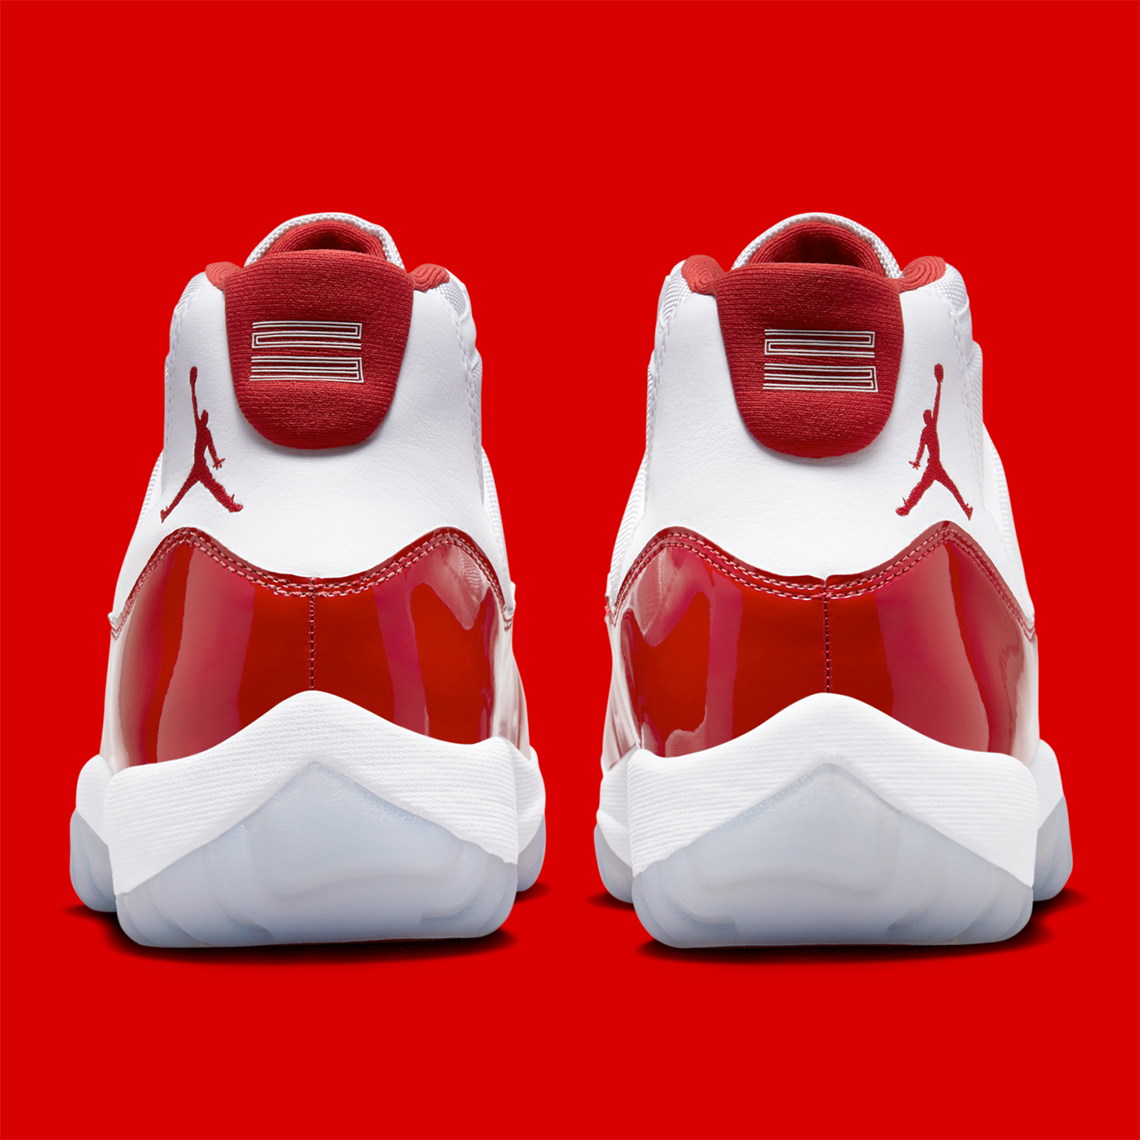 Jordan Wallace 11 Cherry Ct8012 116 Official Images 3